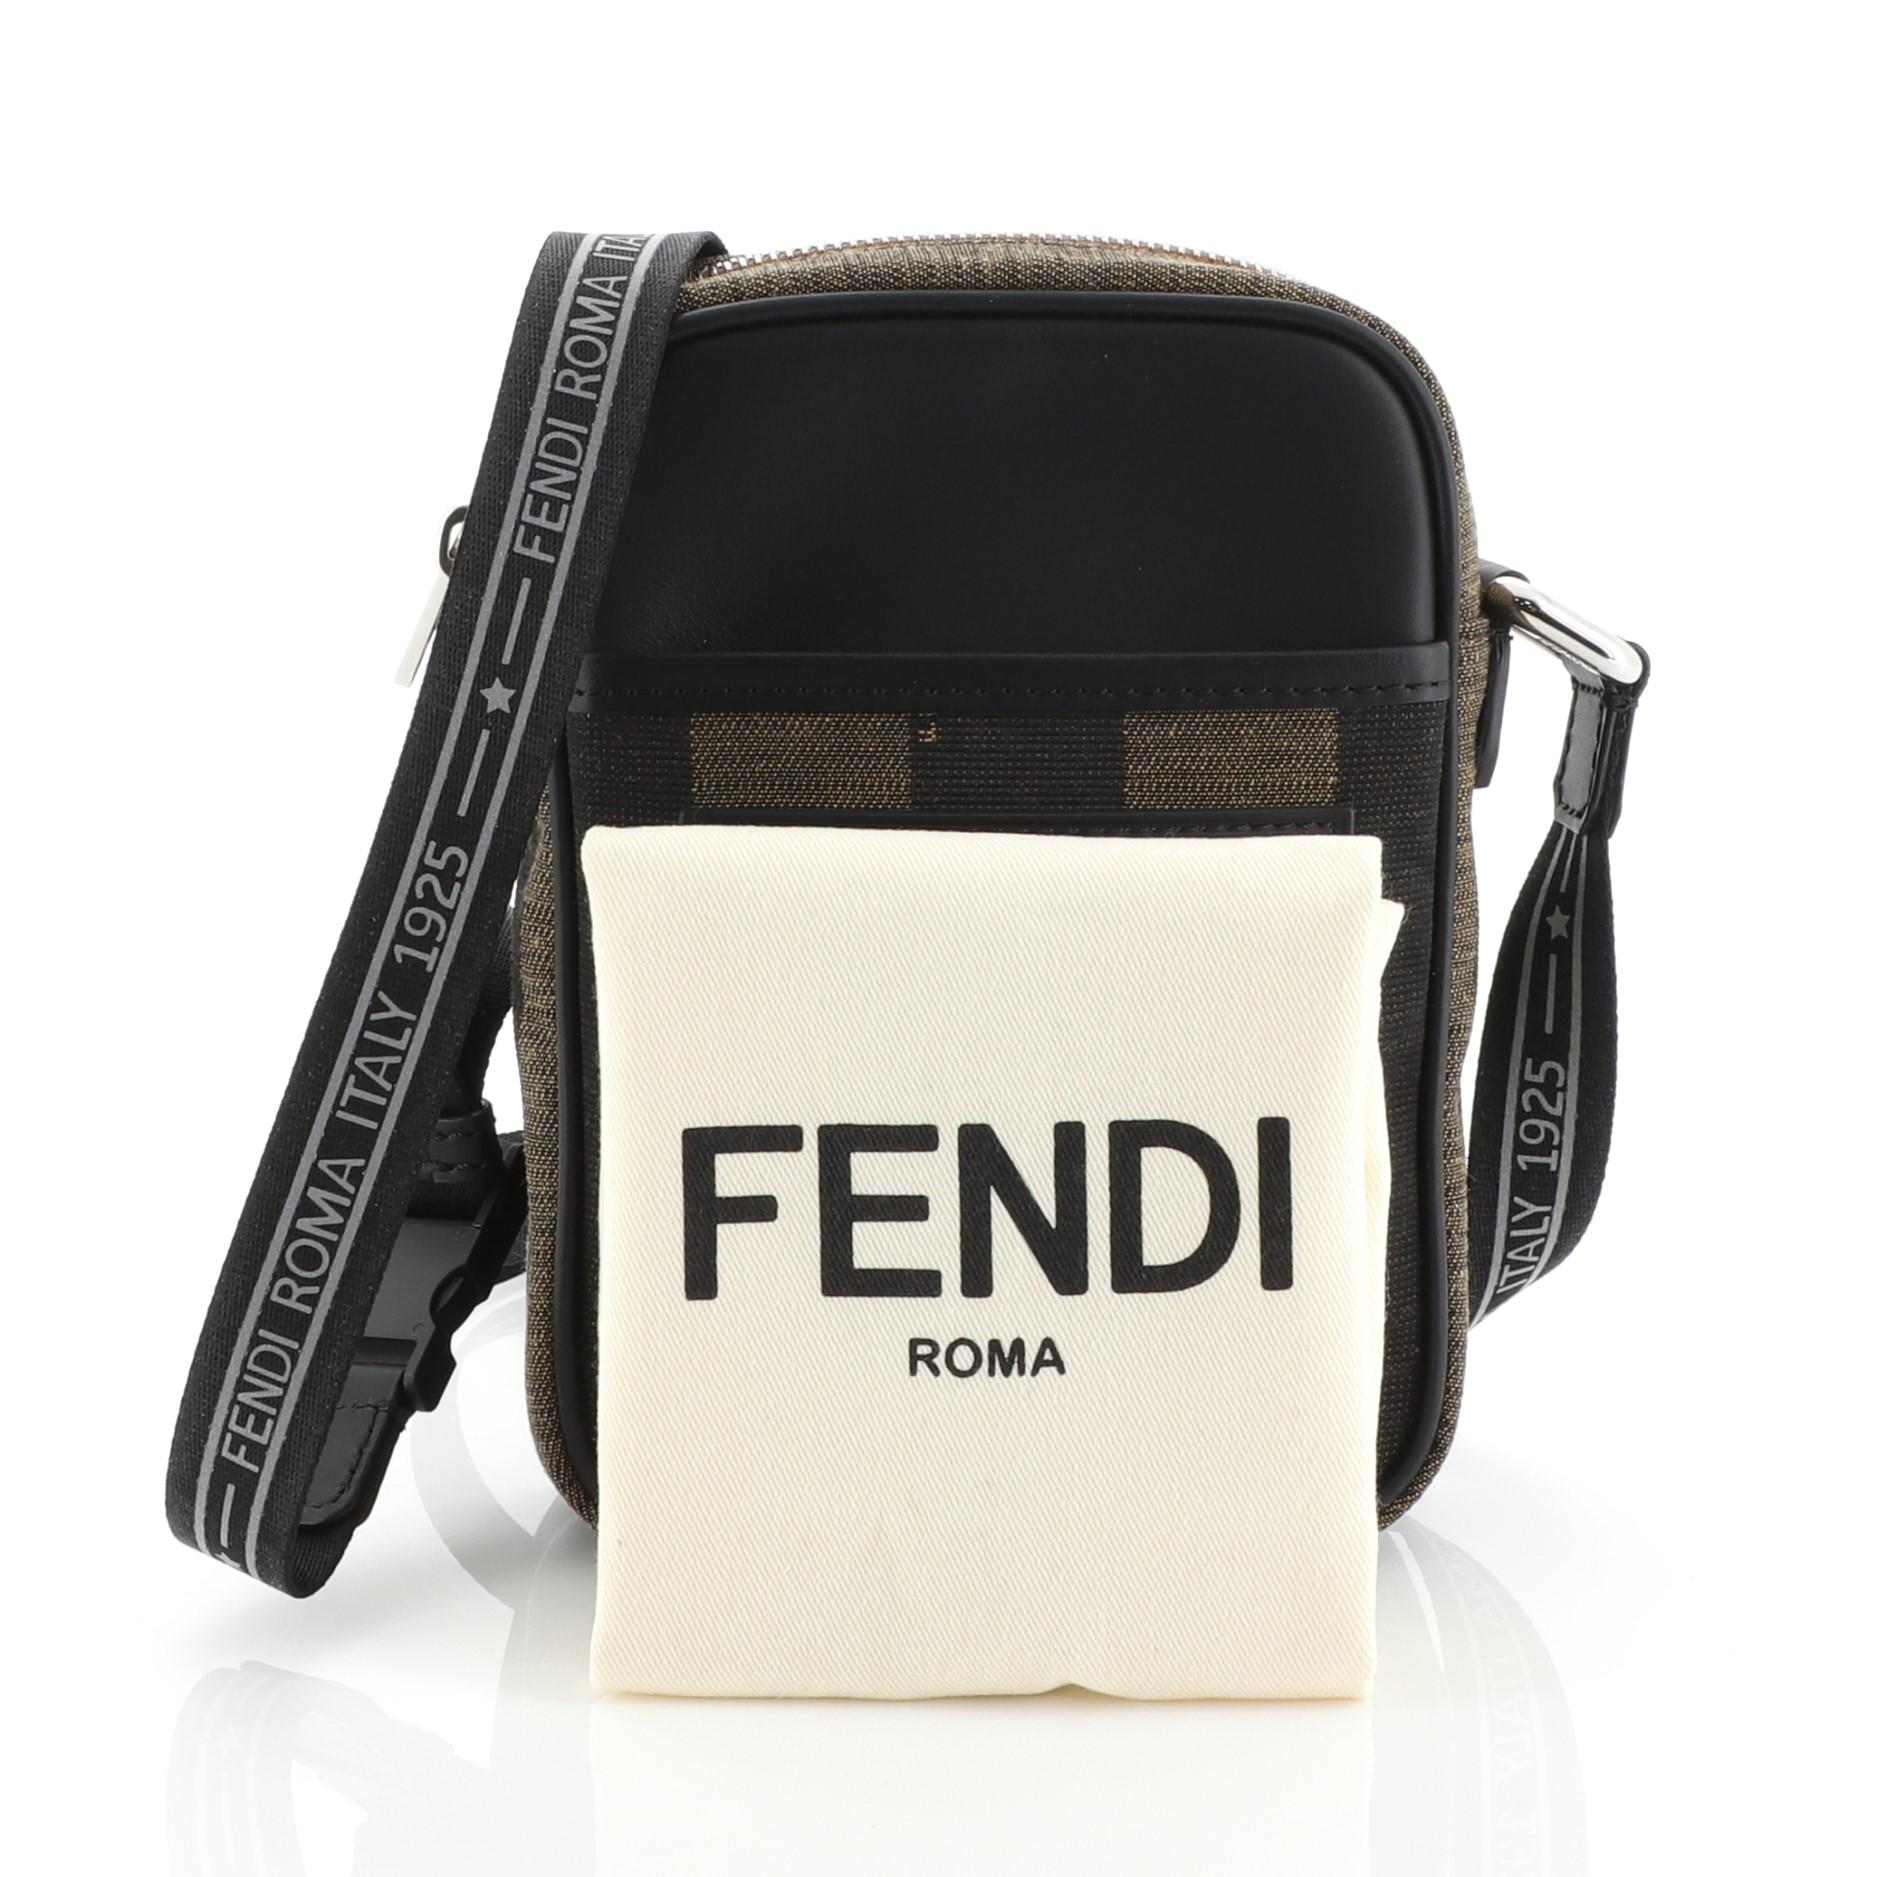 This Fendi Pequin Camera Crossbody Bag Canvas Mini, crafted in brown canvas and black leather, features adjustable shoulder strap, Fendi logo at front and silver-tone hardware. It opens to a red fabric interior. 

Estimated Retail Price: